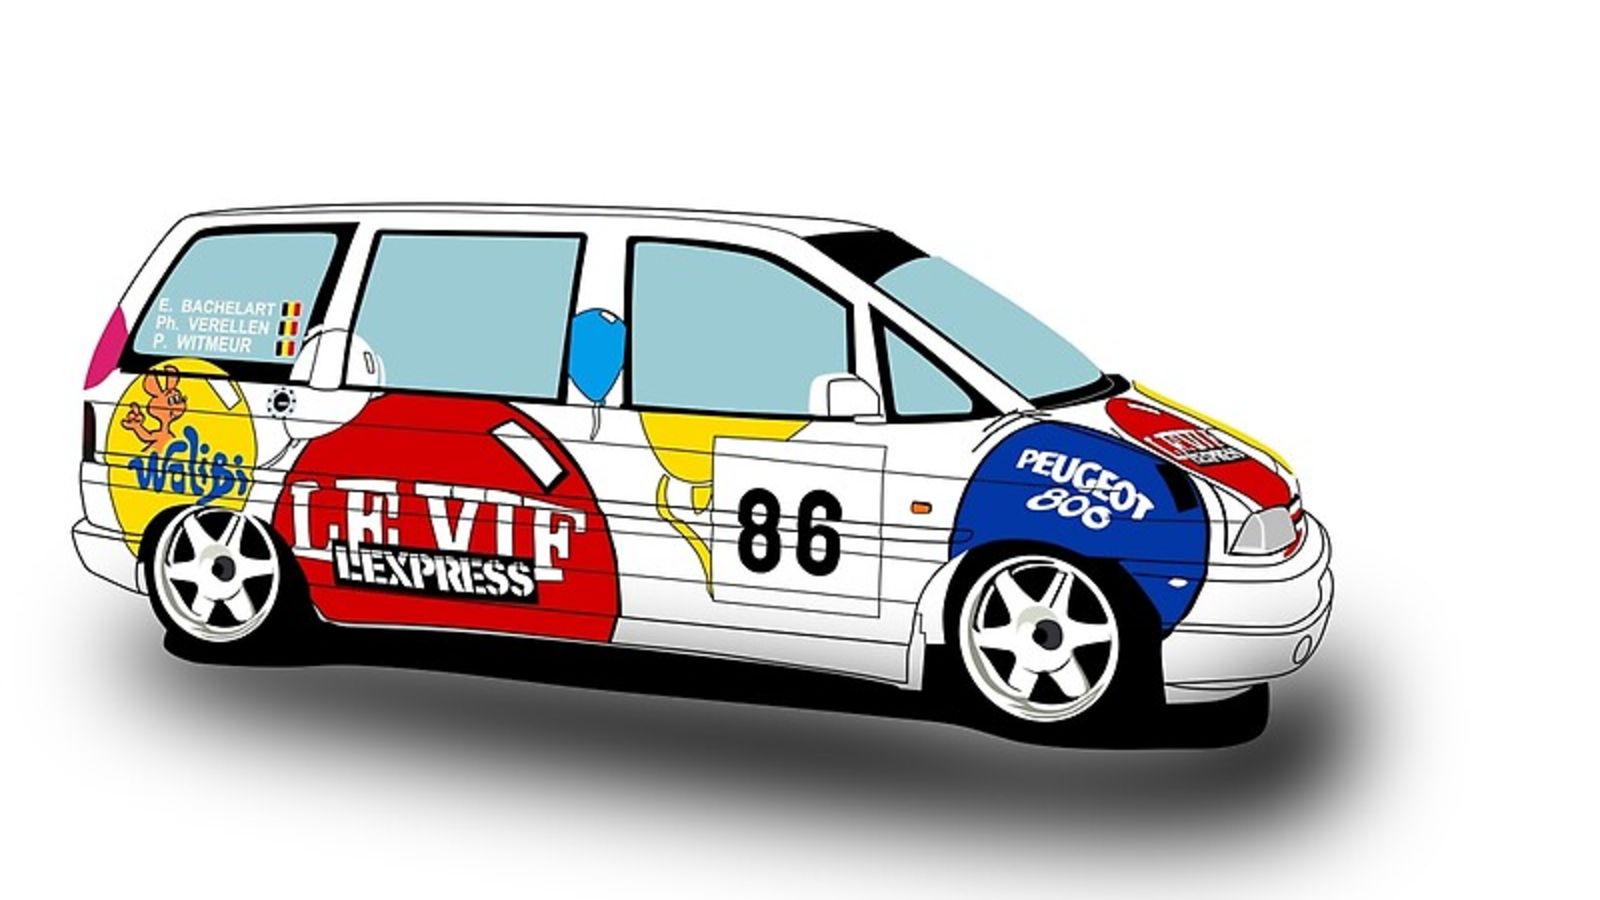 Illustration for article titled Minivans can also be racecars, sometimes, before they break.